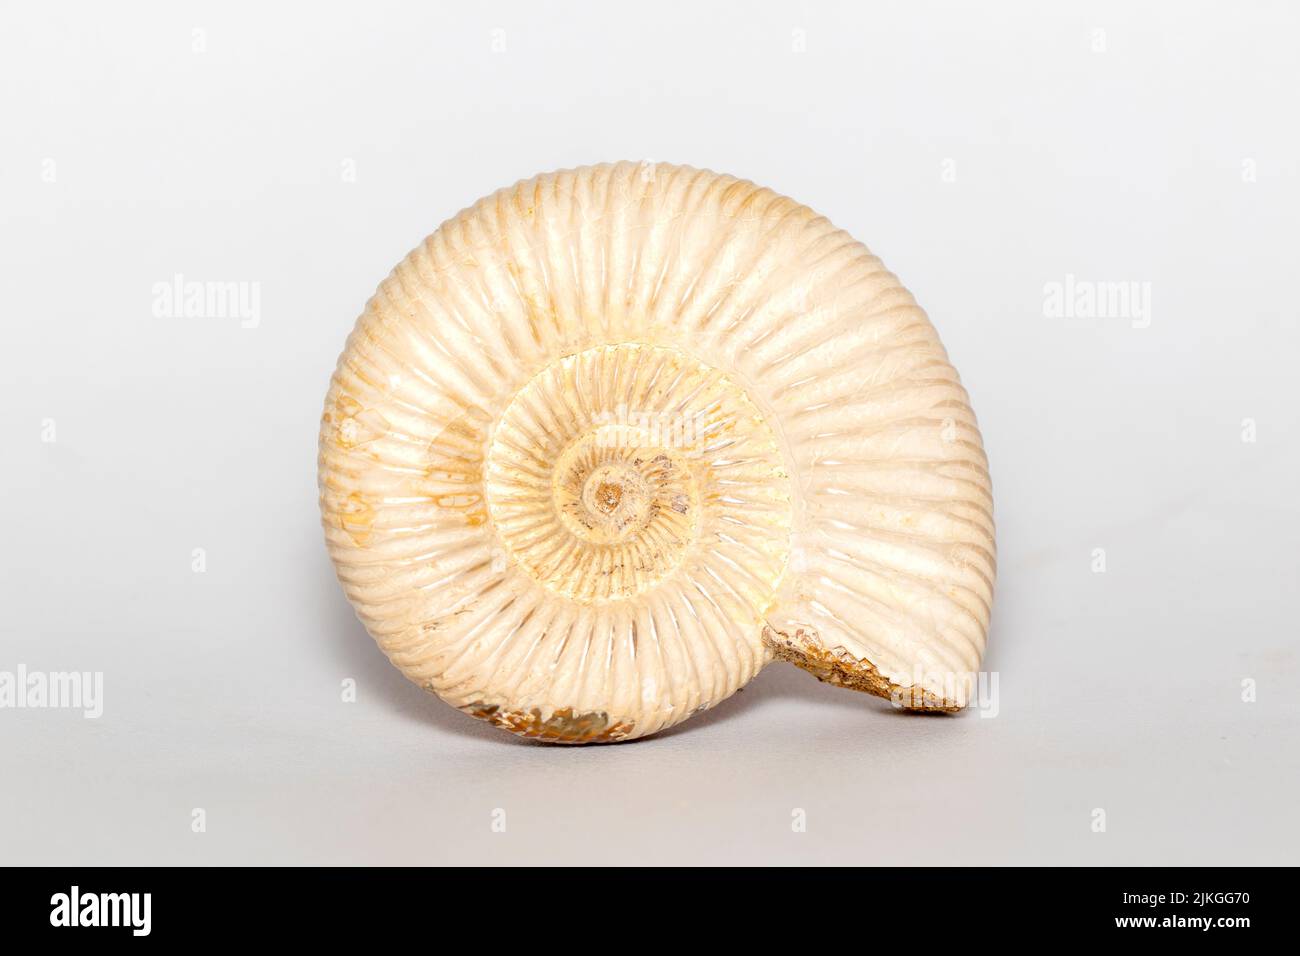 Image of ammonite on a white background. Fossil. Sea shells. Stock Photo